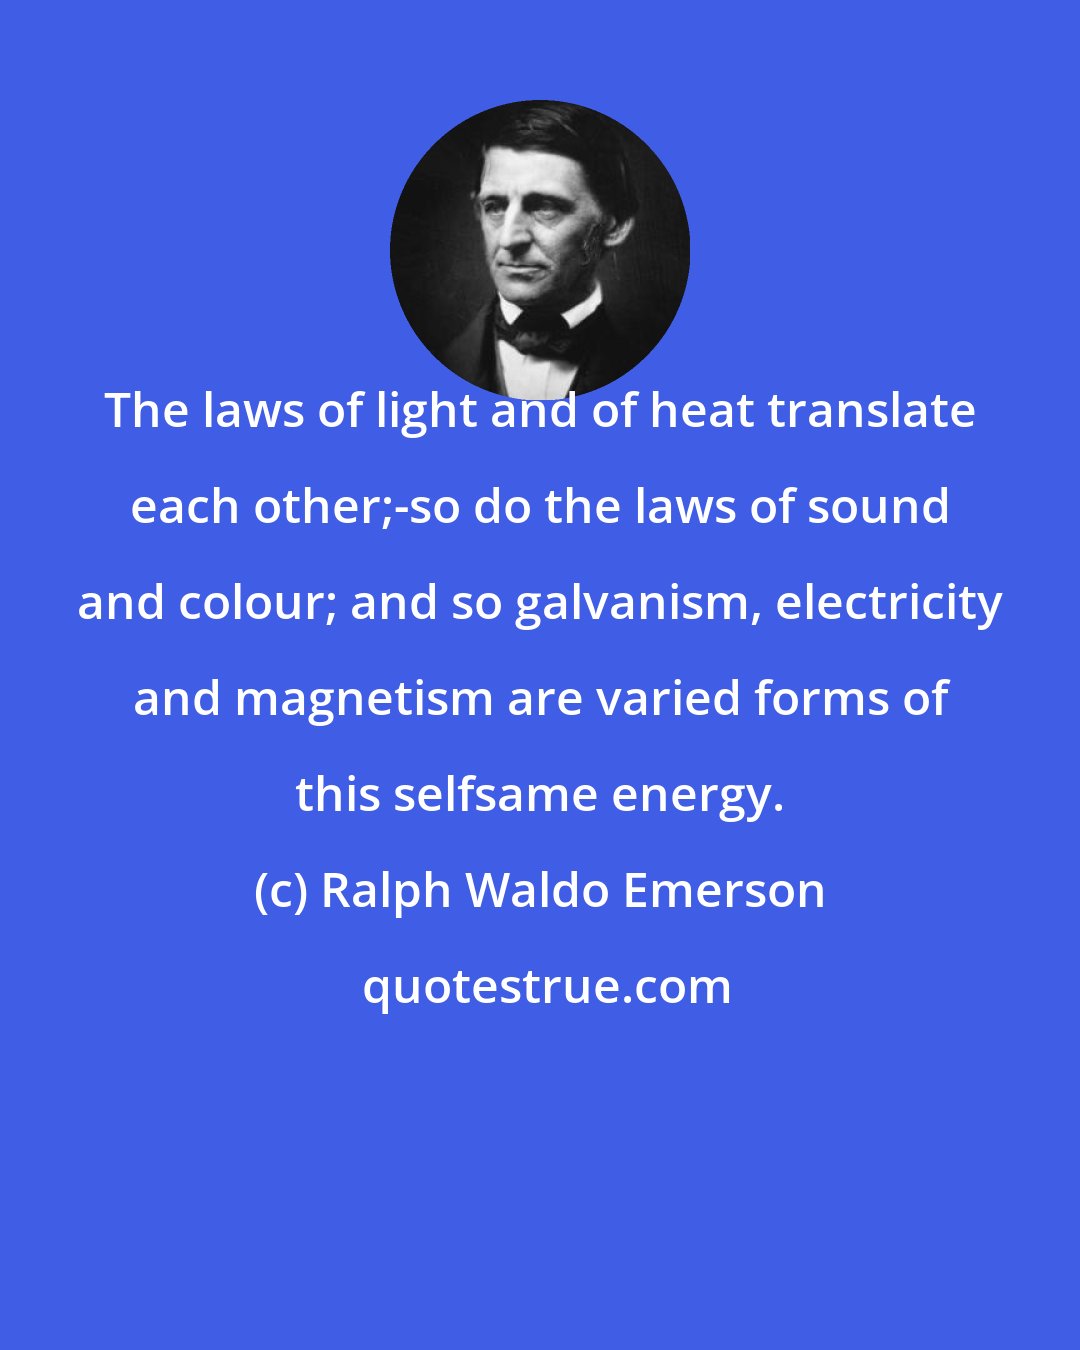 Ralph Waldo Emerson: The laws of light and of heat translate each other;-so do the laws of sound and colour; and so galvanism, electricity and magnetism are varied forms of this selfsame energy.